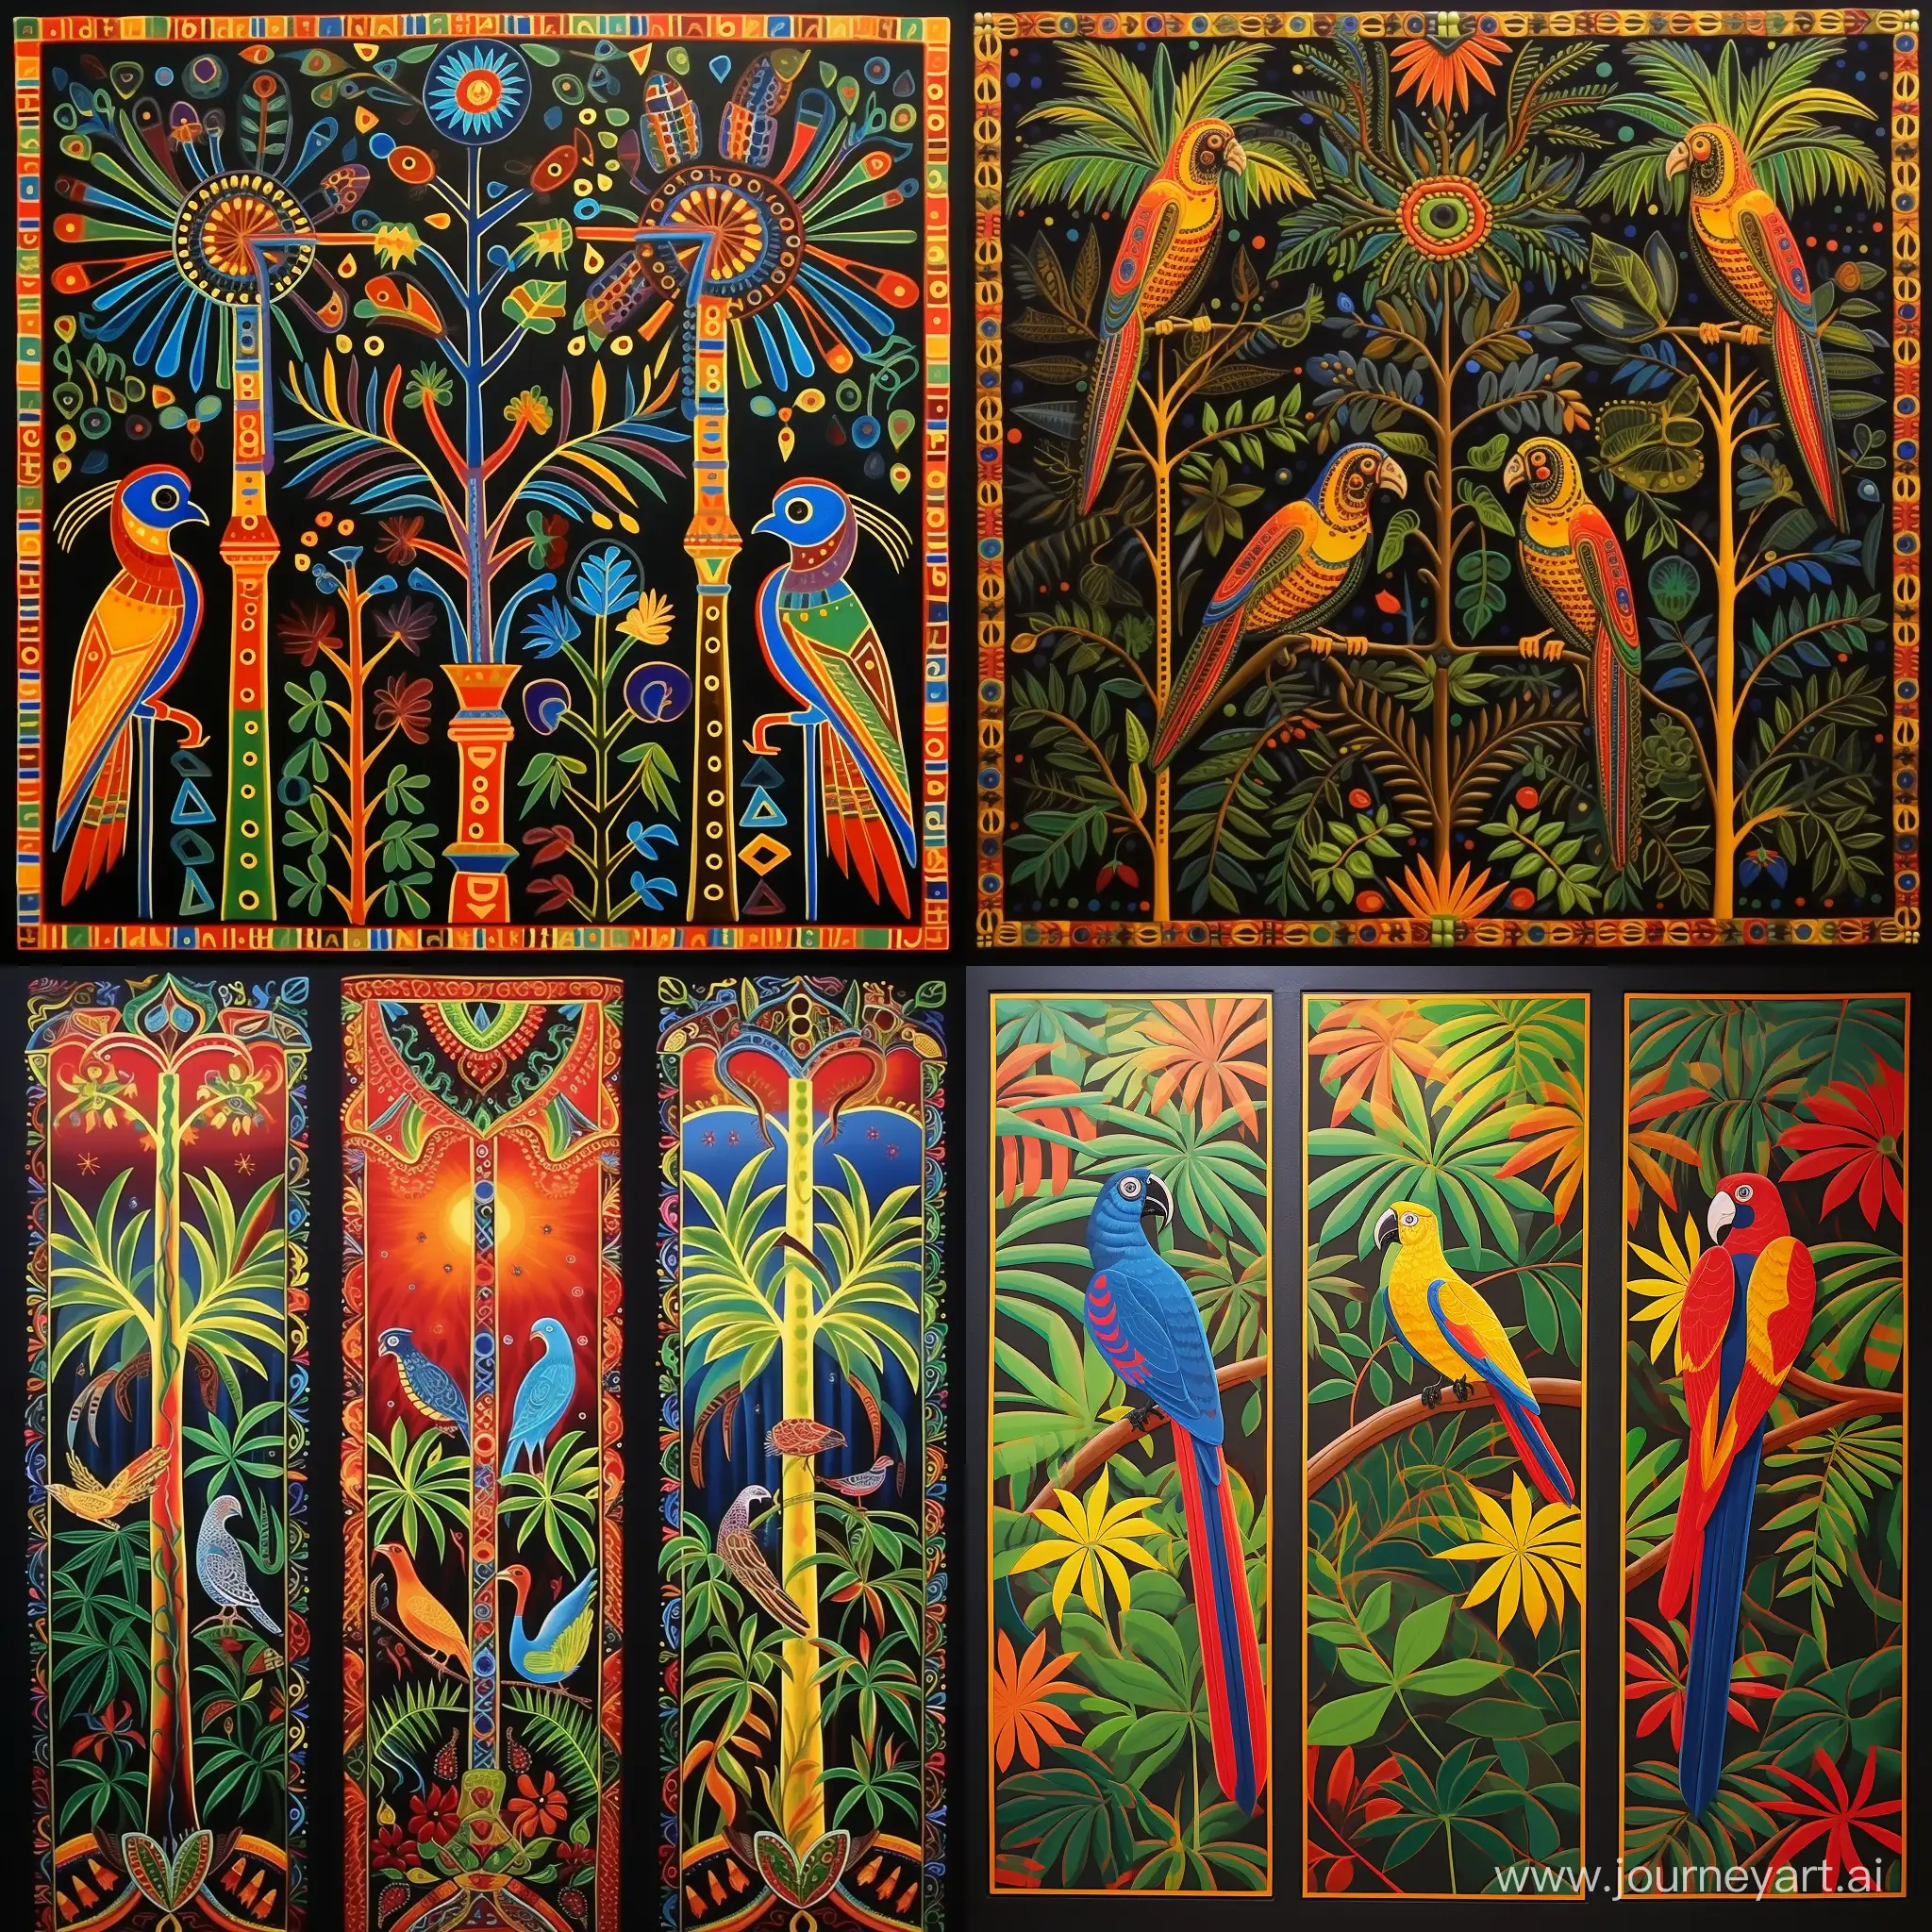 Ethnic-Art-Canvas-Featuring-Parrots-and-African-Patterns